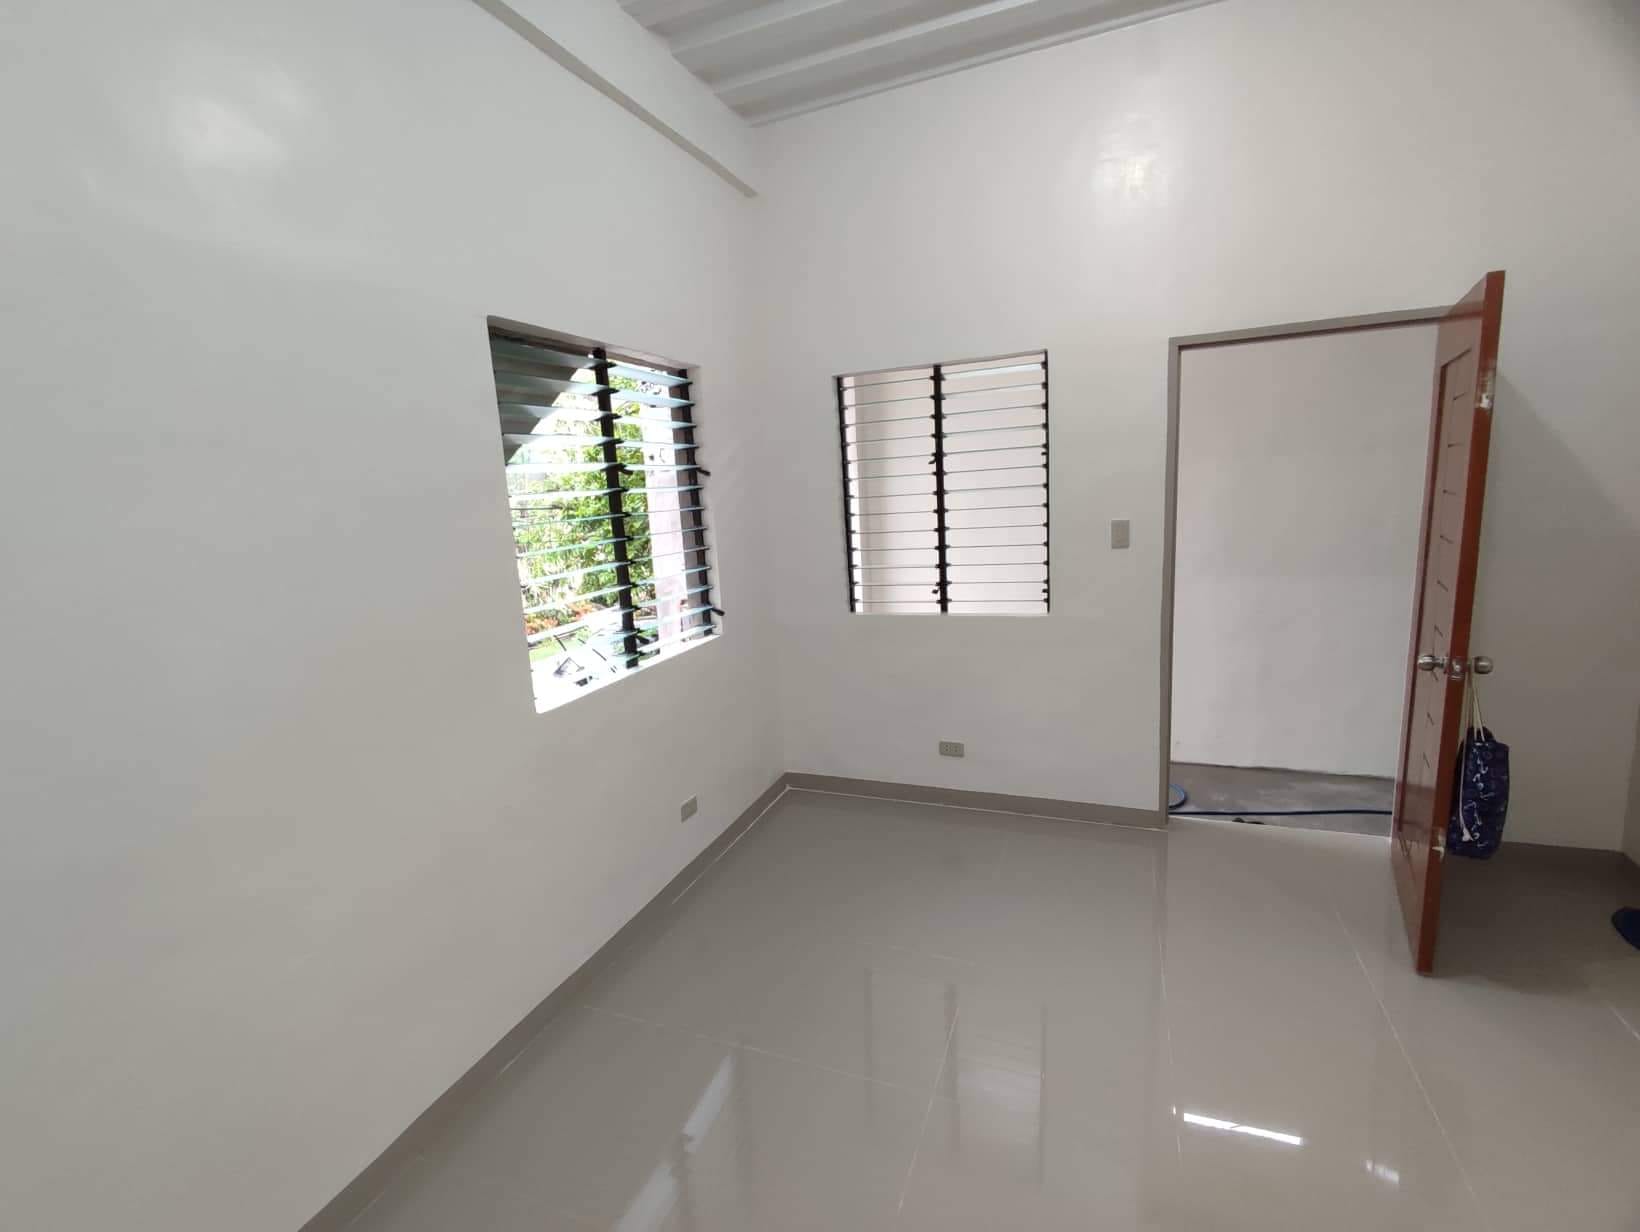 Apartment for rent in Panghulo, Malabon